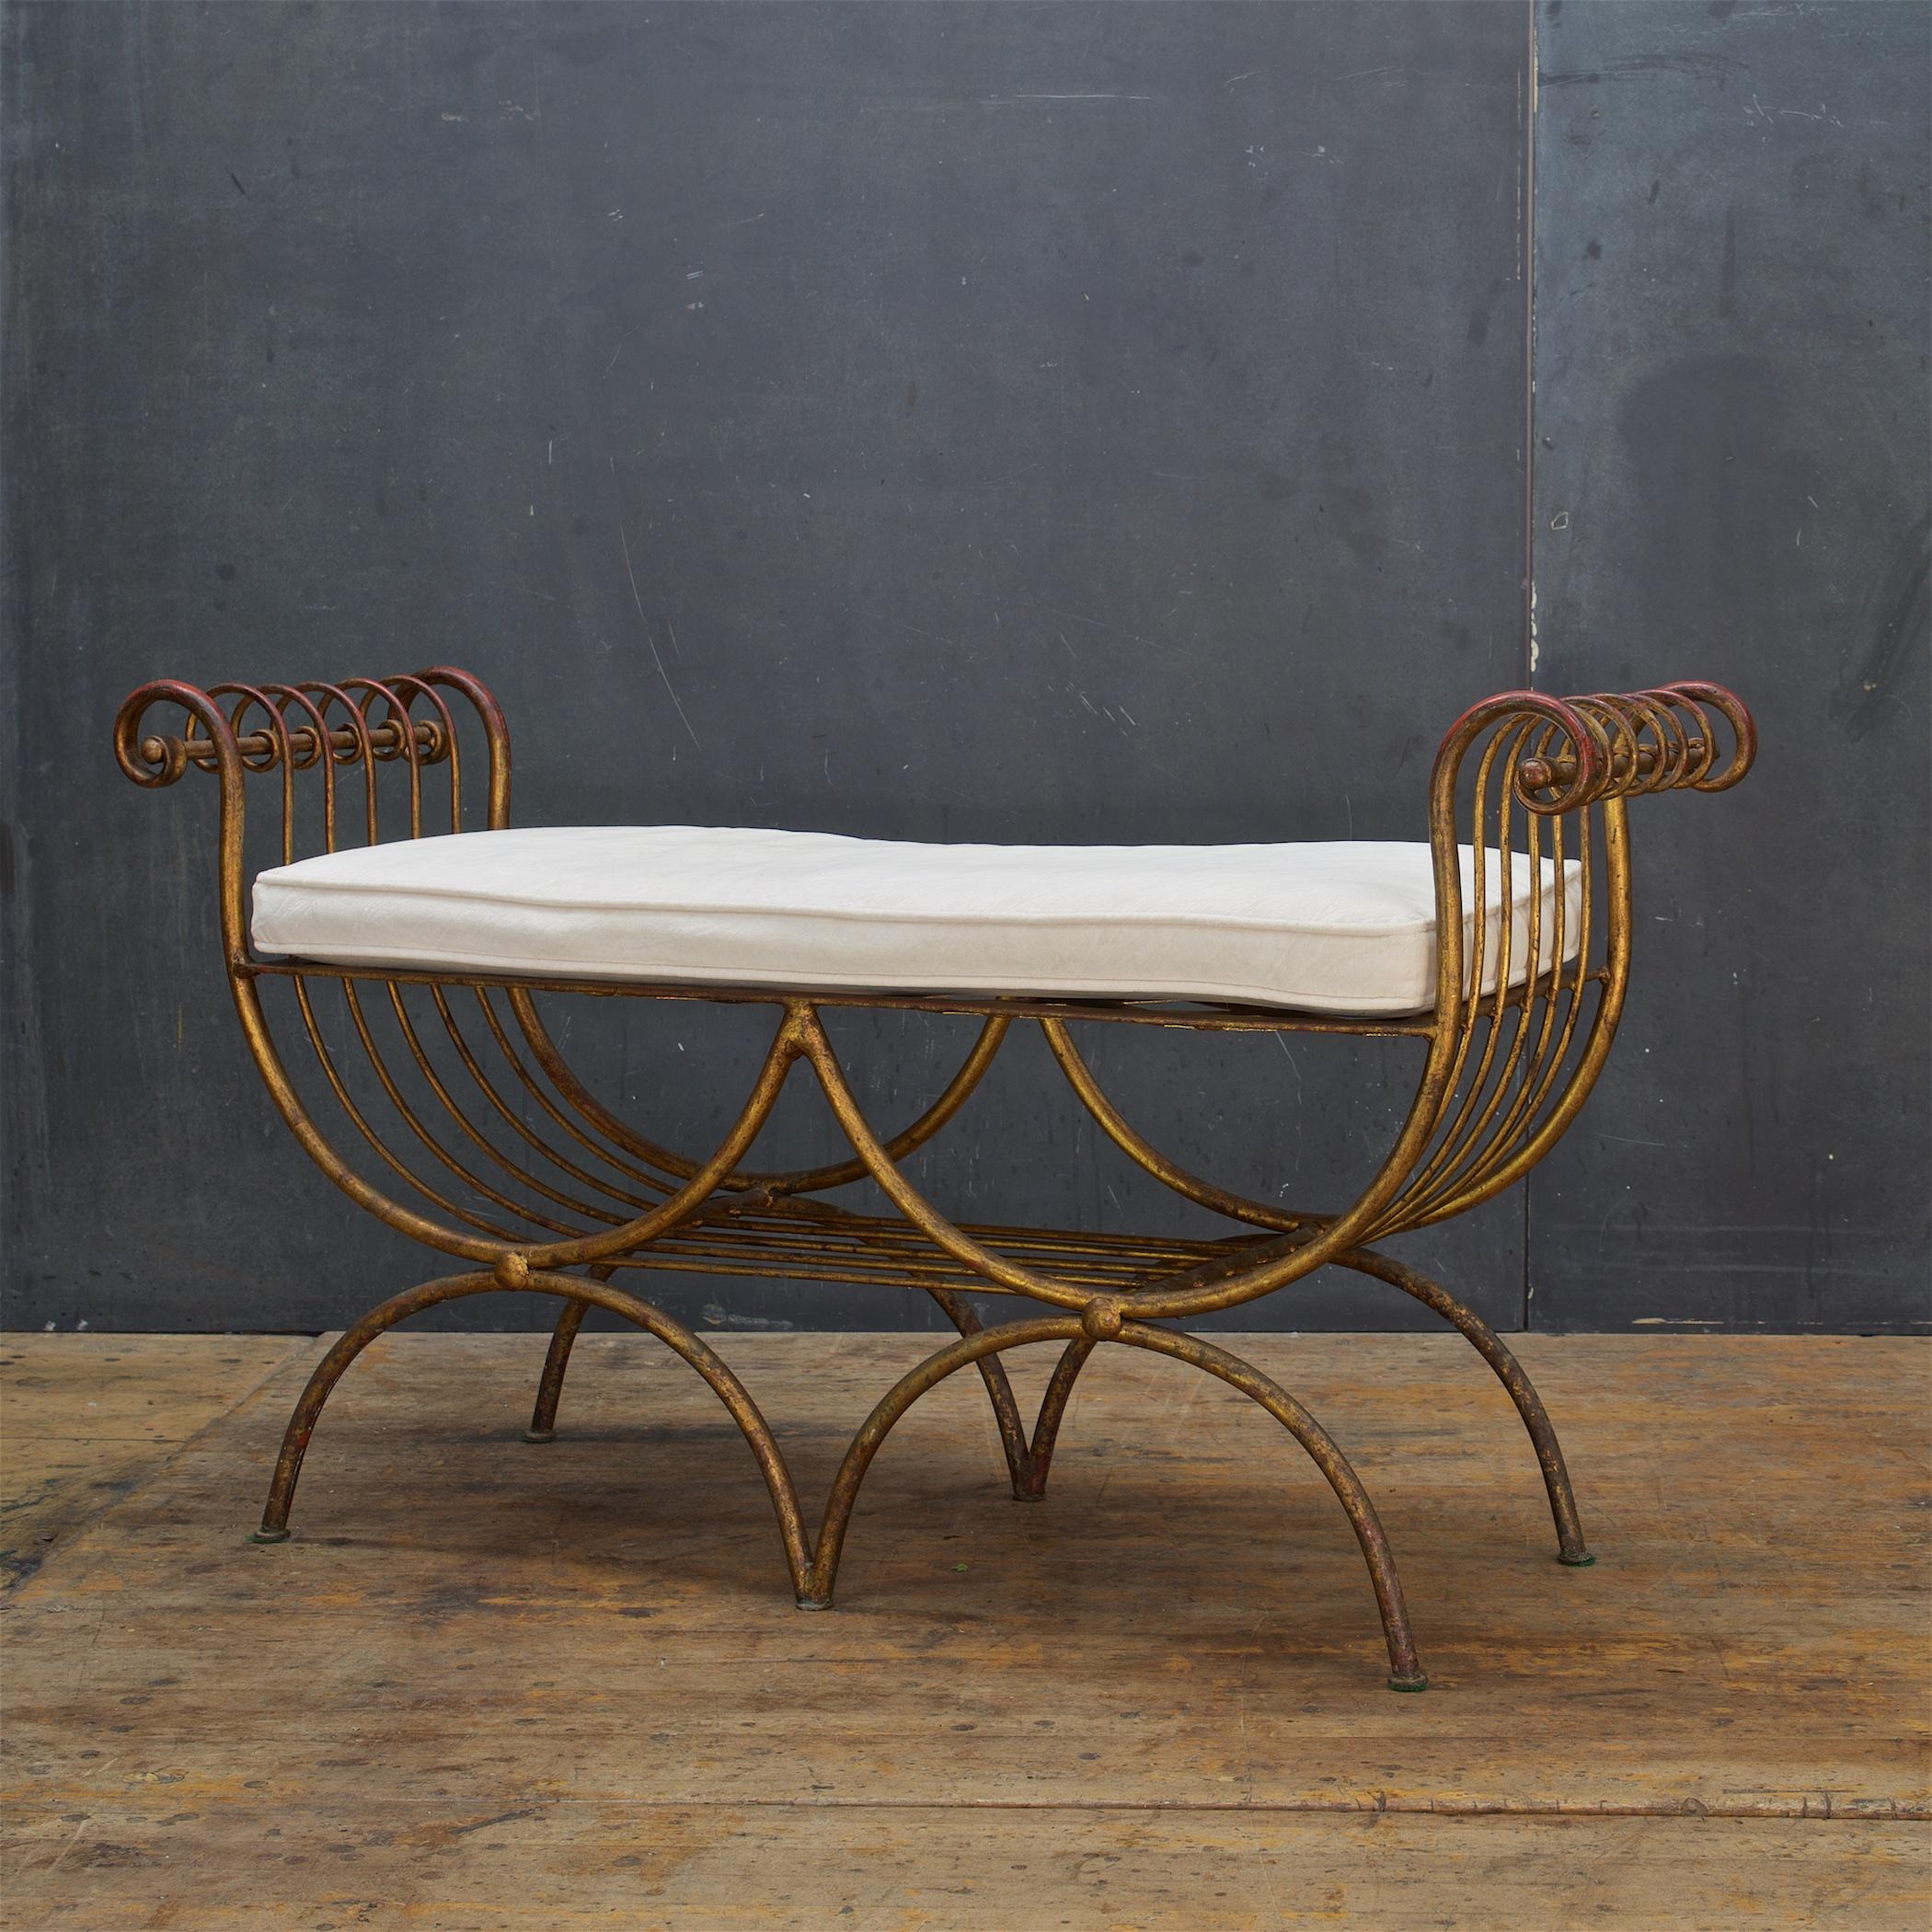 S. Salvadori 1950s Italian stool or small bench is composed of a enameled gilt metal frame with older ivory velvet cushion. Inspired by a Greek lyre harp form. Retains a metal hang tag marked, Made in Italy.

Includes soiled original upholstery, we